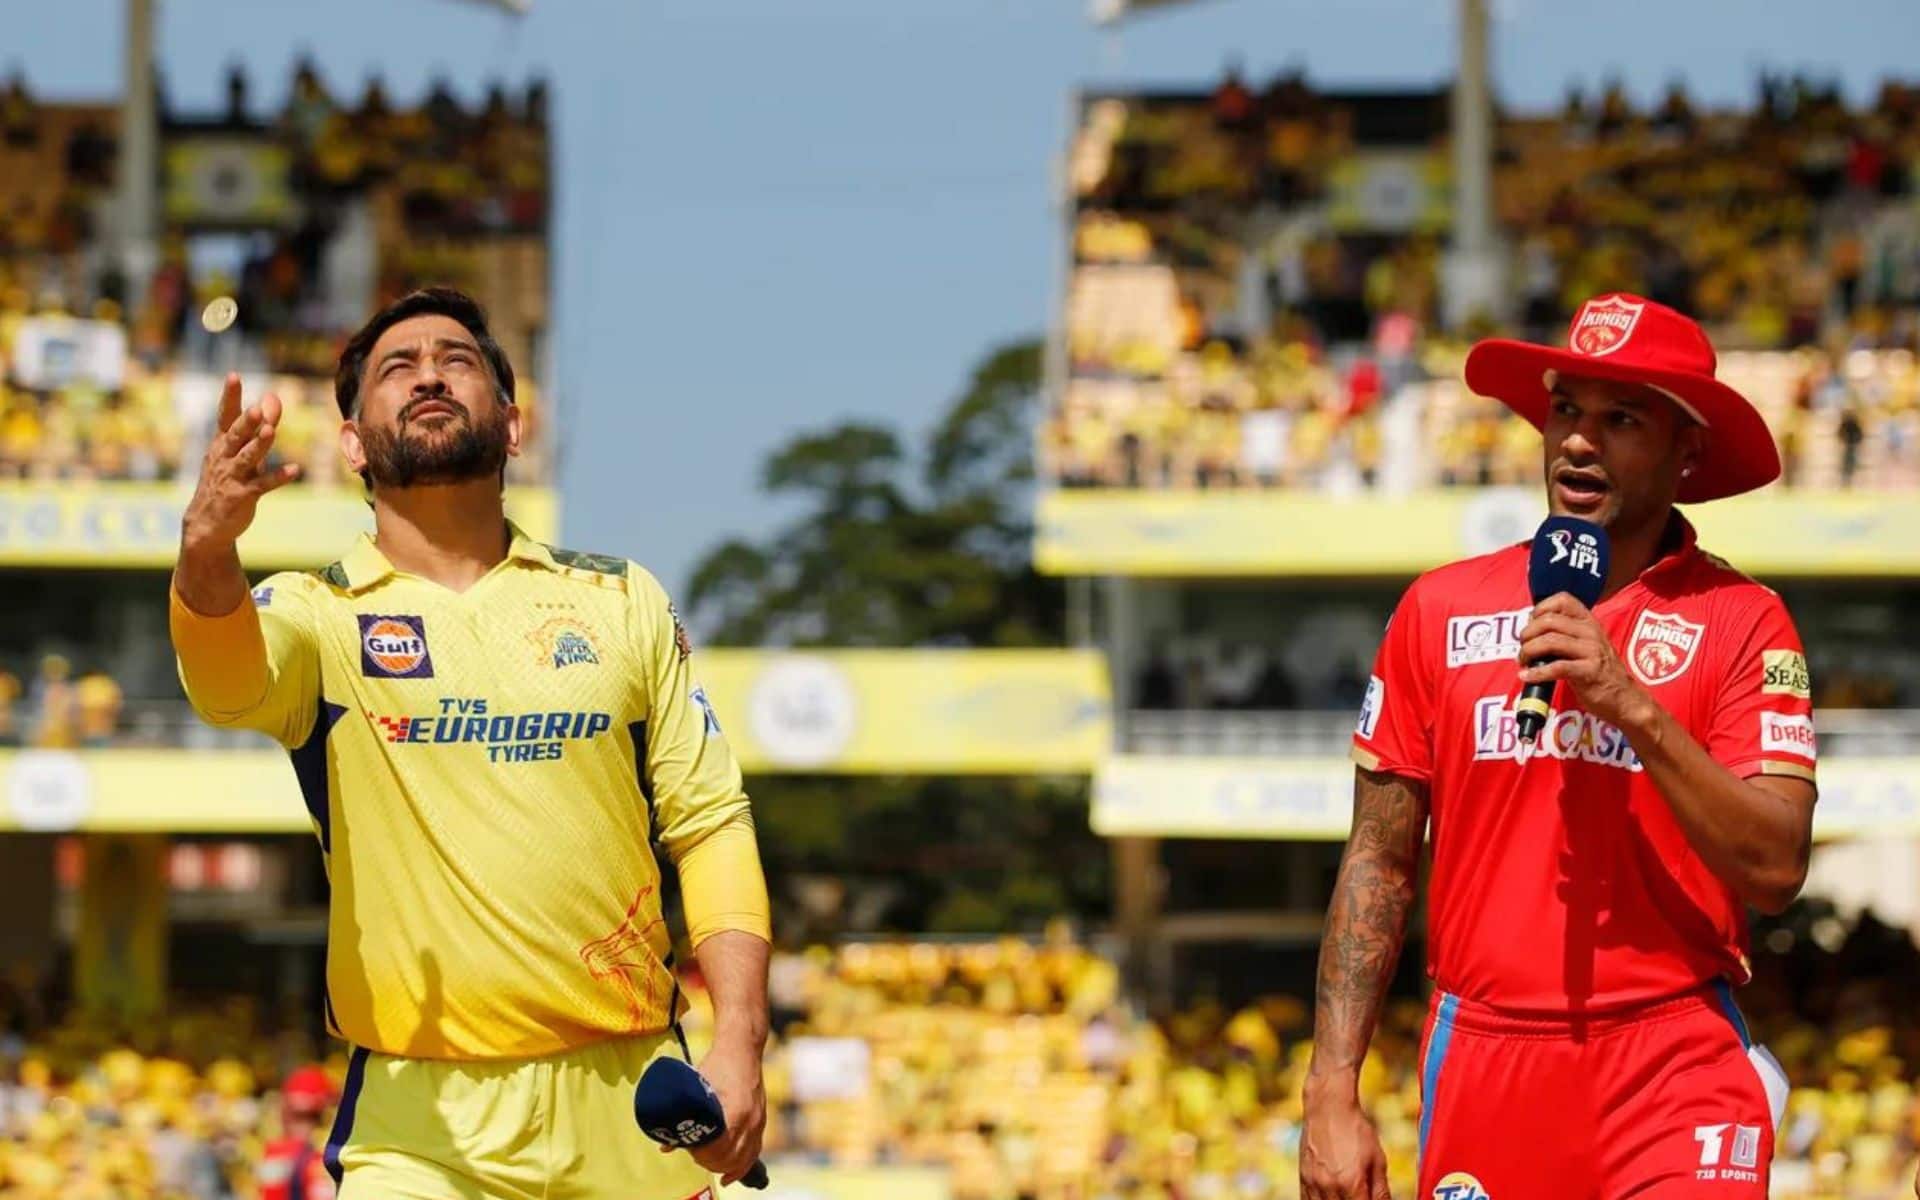 MS Dhoni and Shilkhar Dhawan during toss in IPL 2023 [iplt20.com]